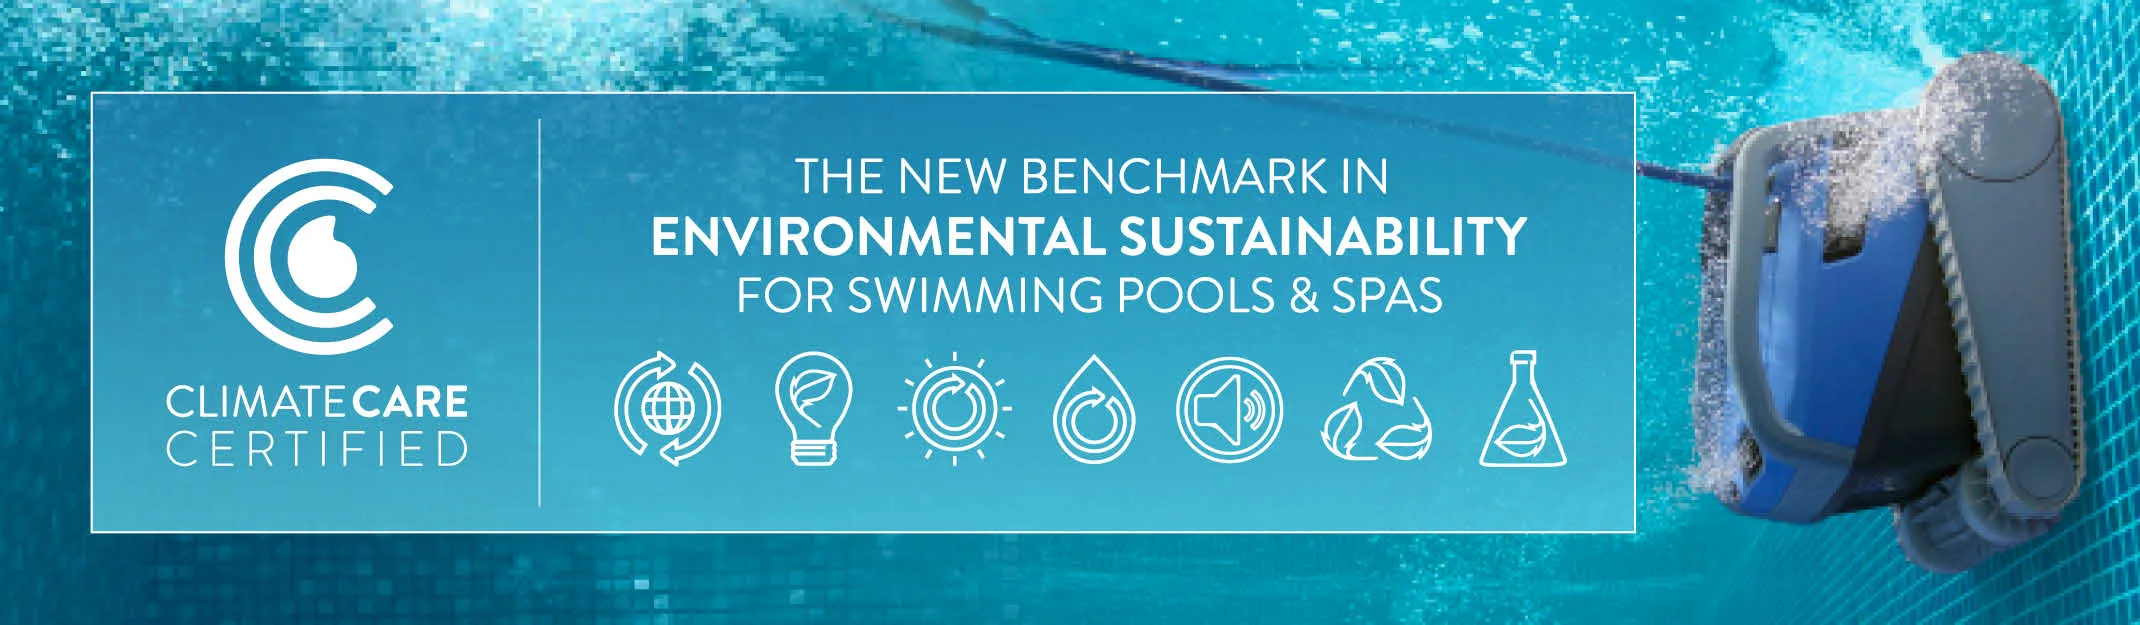 Dolphin range of robotic pool cleaners environmental sustainability